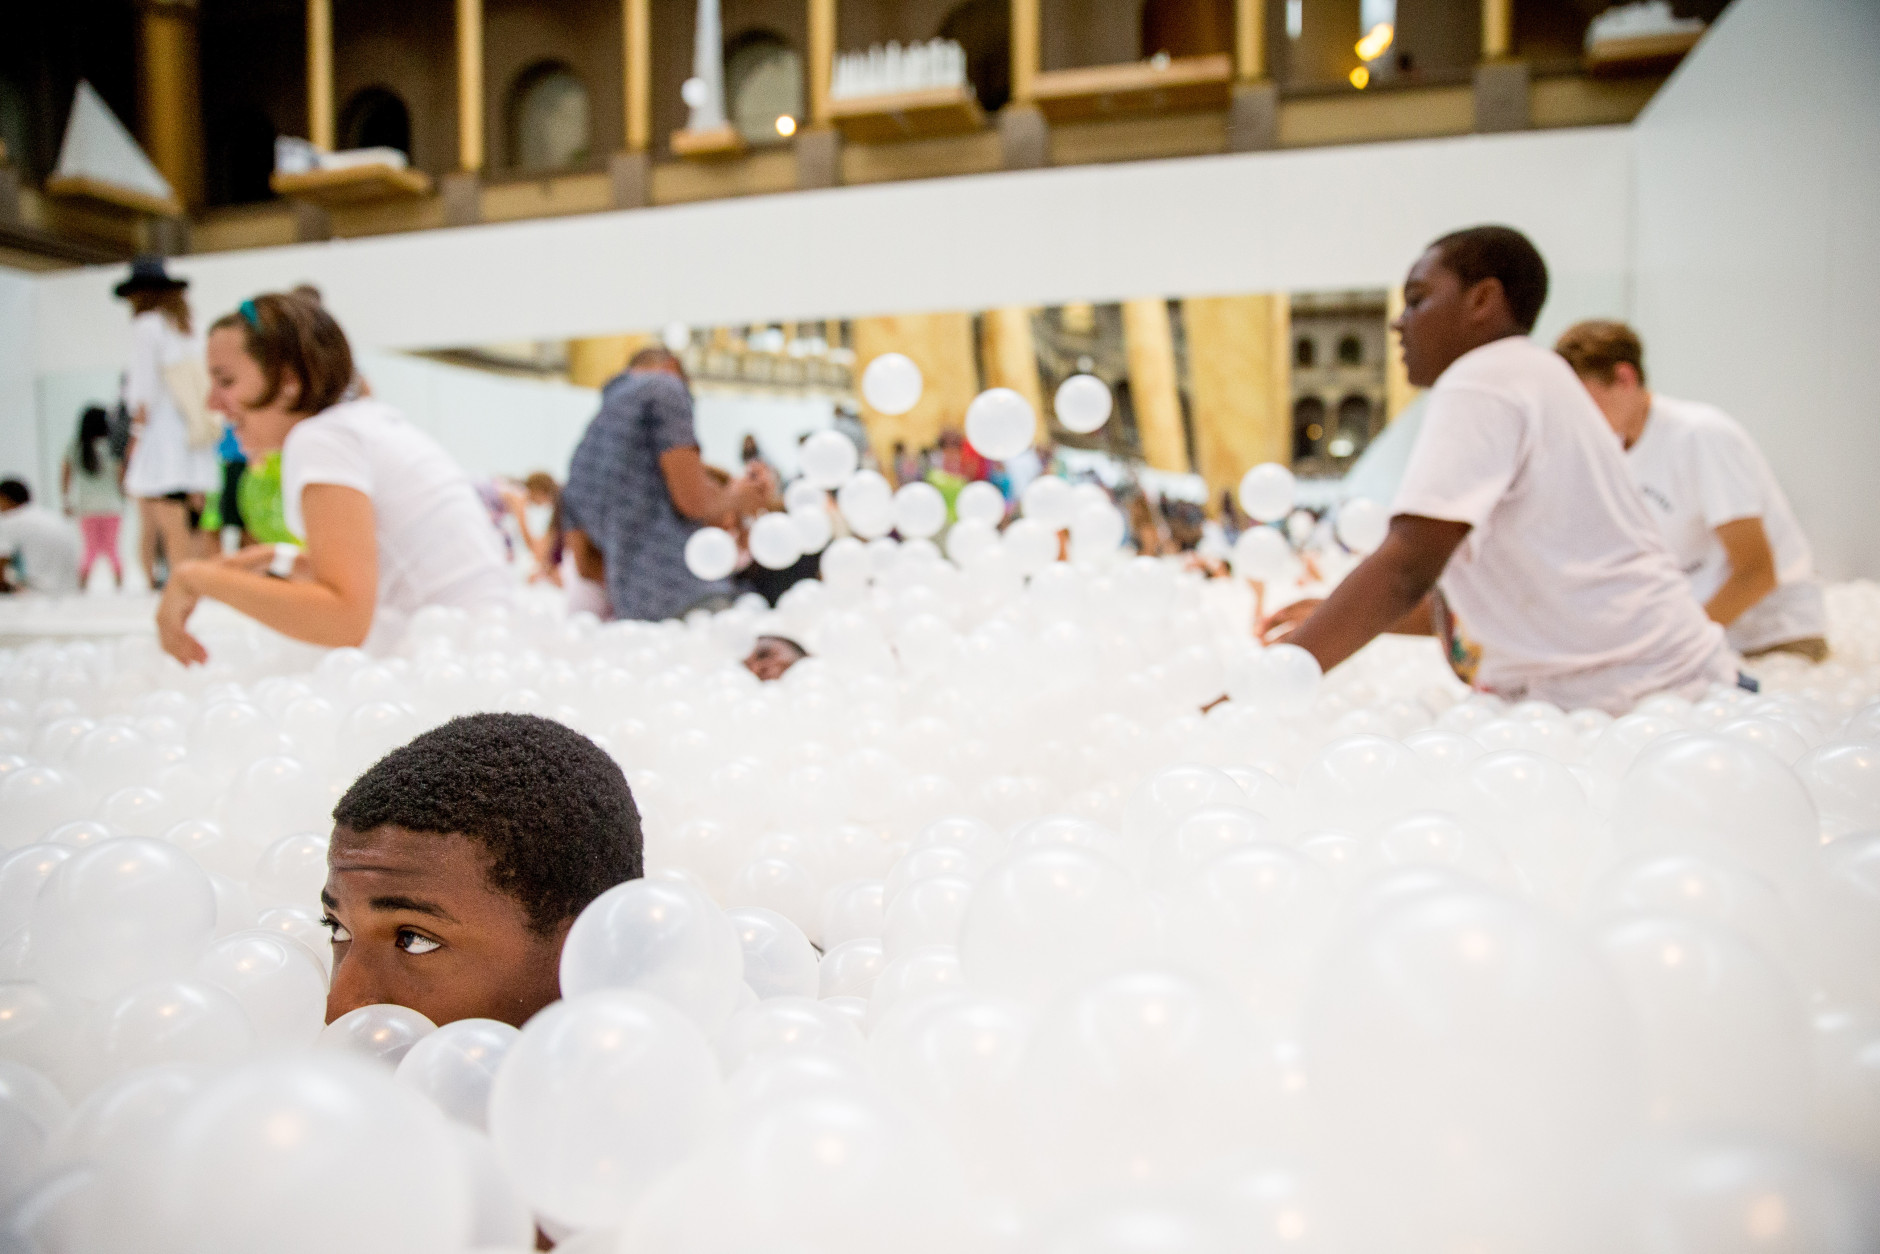 People play at "The Beach", an interactive architectural installation inside the National Building Museum in Washington, Friday, July 17, 2015. The Beach, which spans the length of the museum's Great Hall, was created in partnership with Snarkitecture, and covers 10,000 square feet and includes an ocean of nearly one million recyclable translucent plastic balls. (AP Photo/Andrew Harnik)